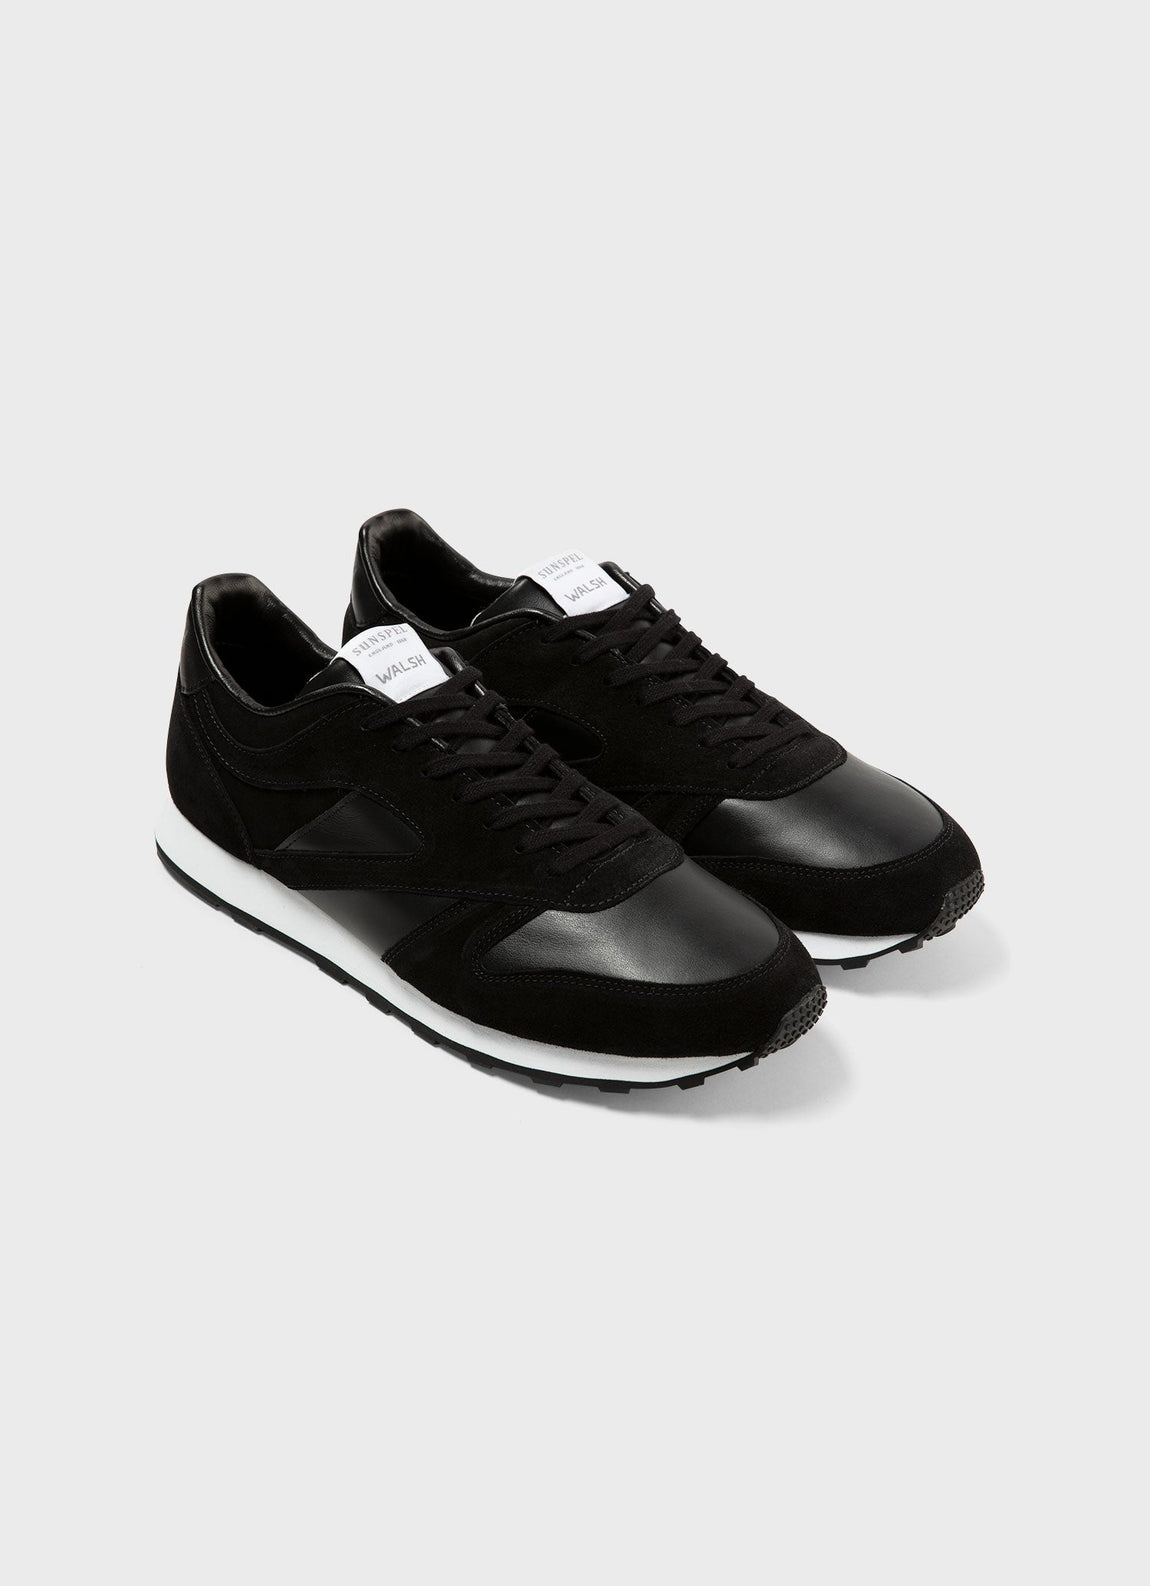 Sunspel and Walsh Trainer in Black